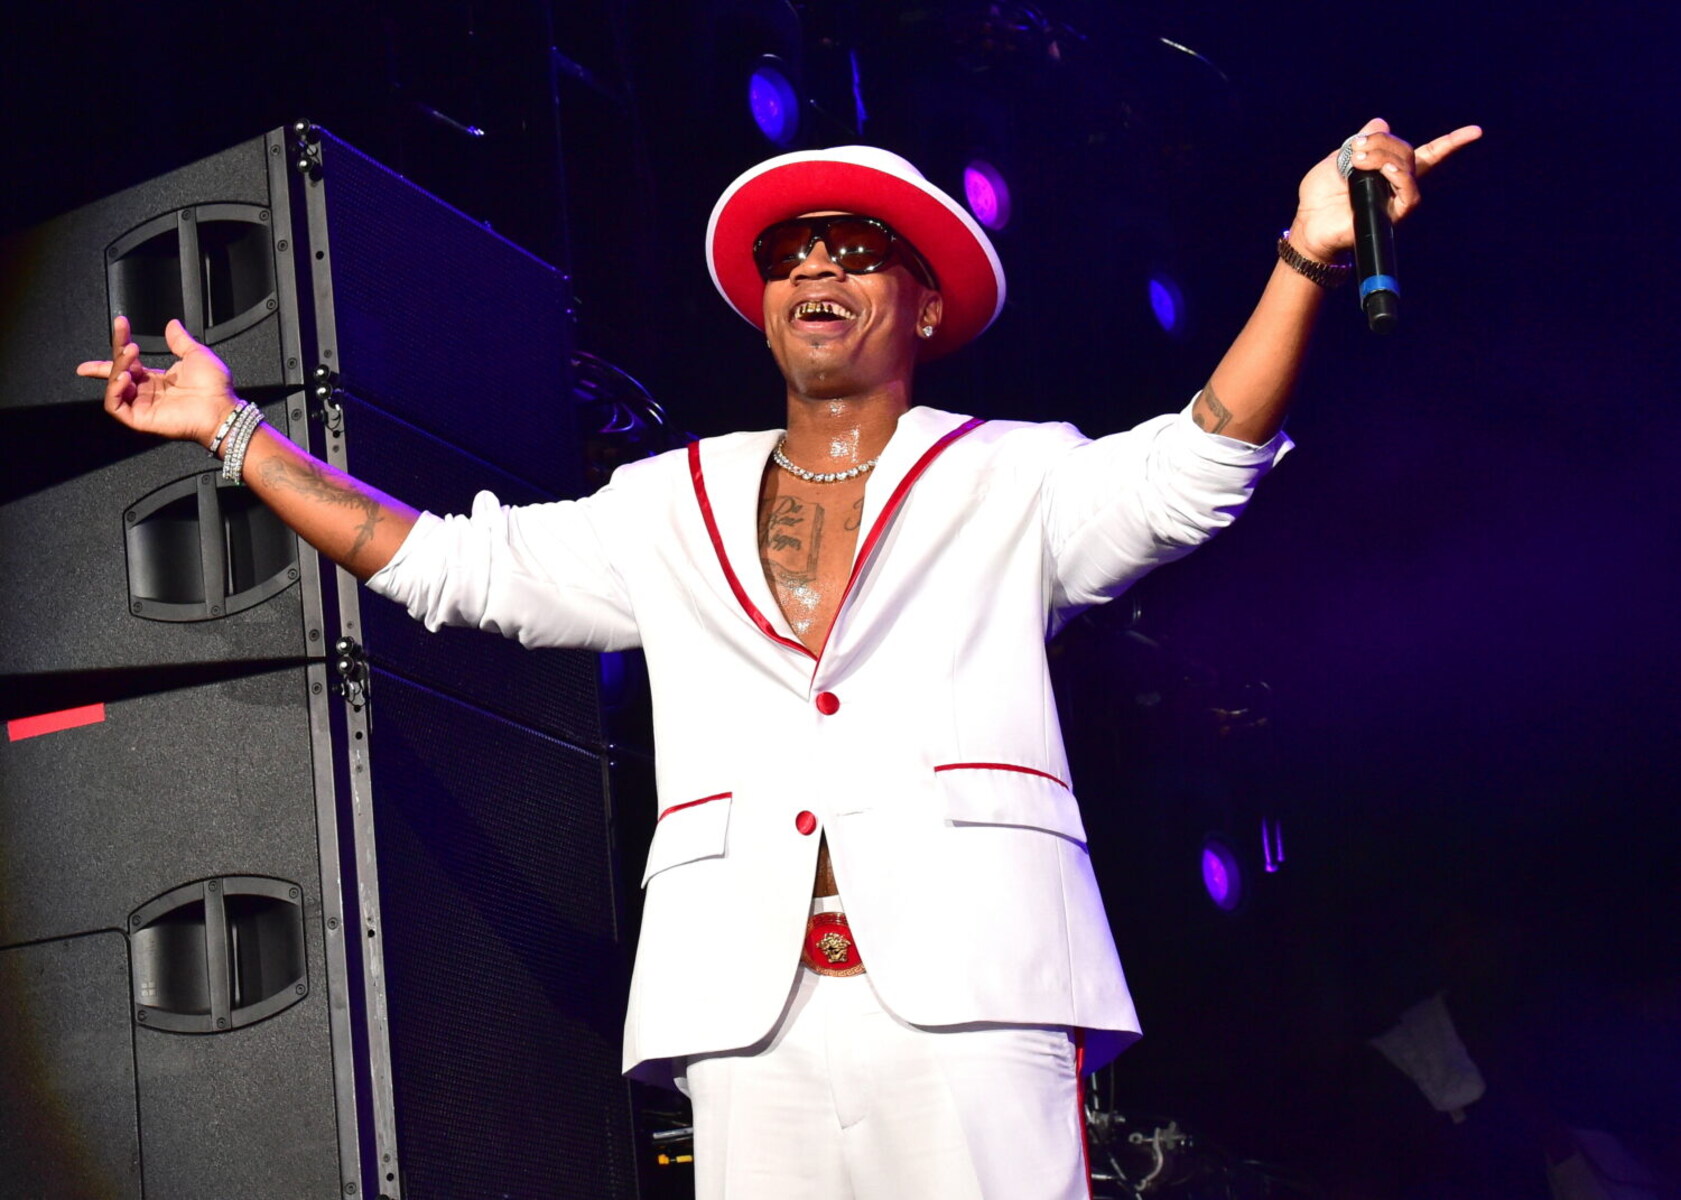 12-extraordinary-facts-about-plies